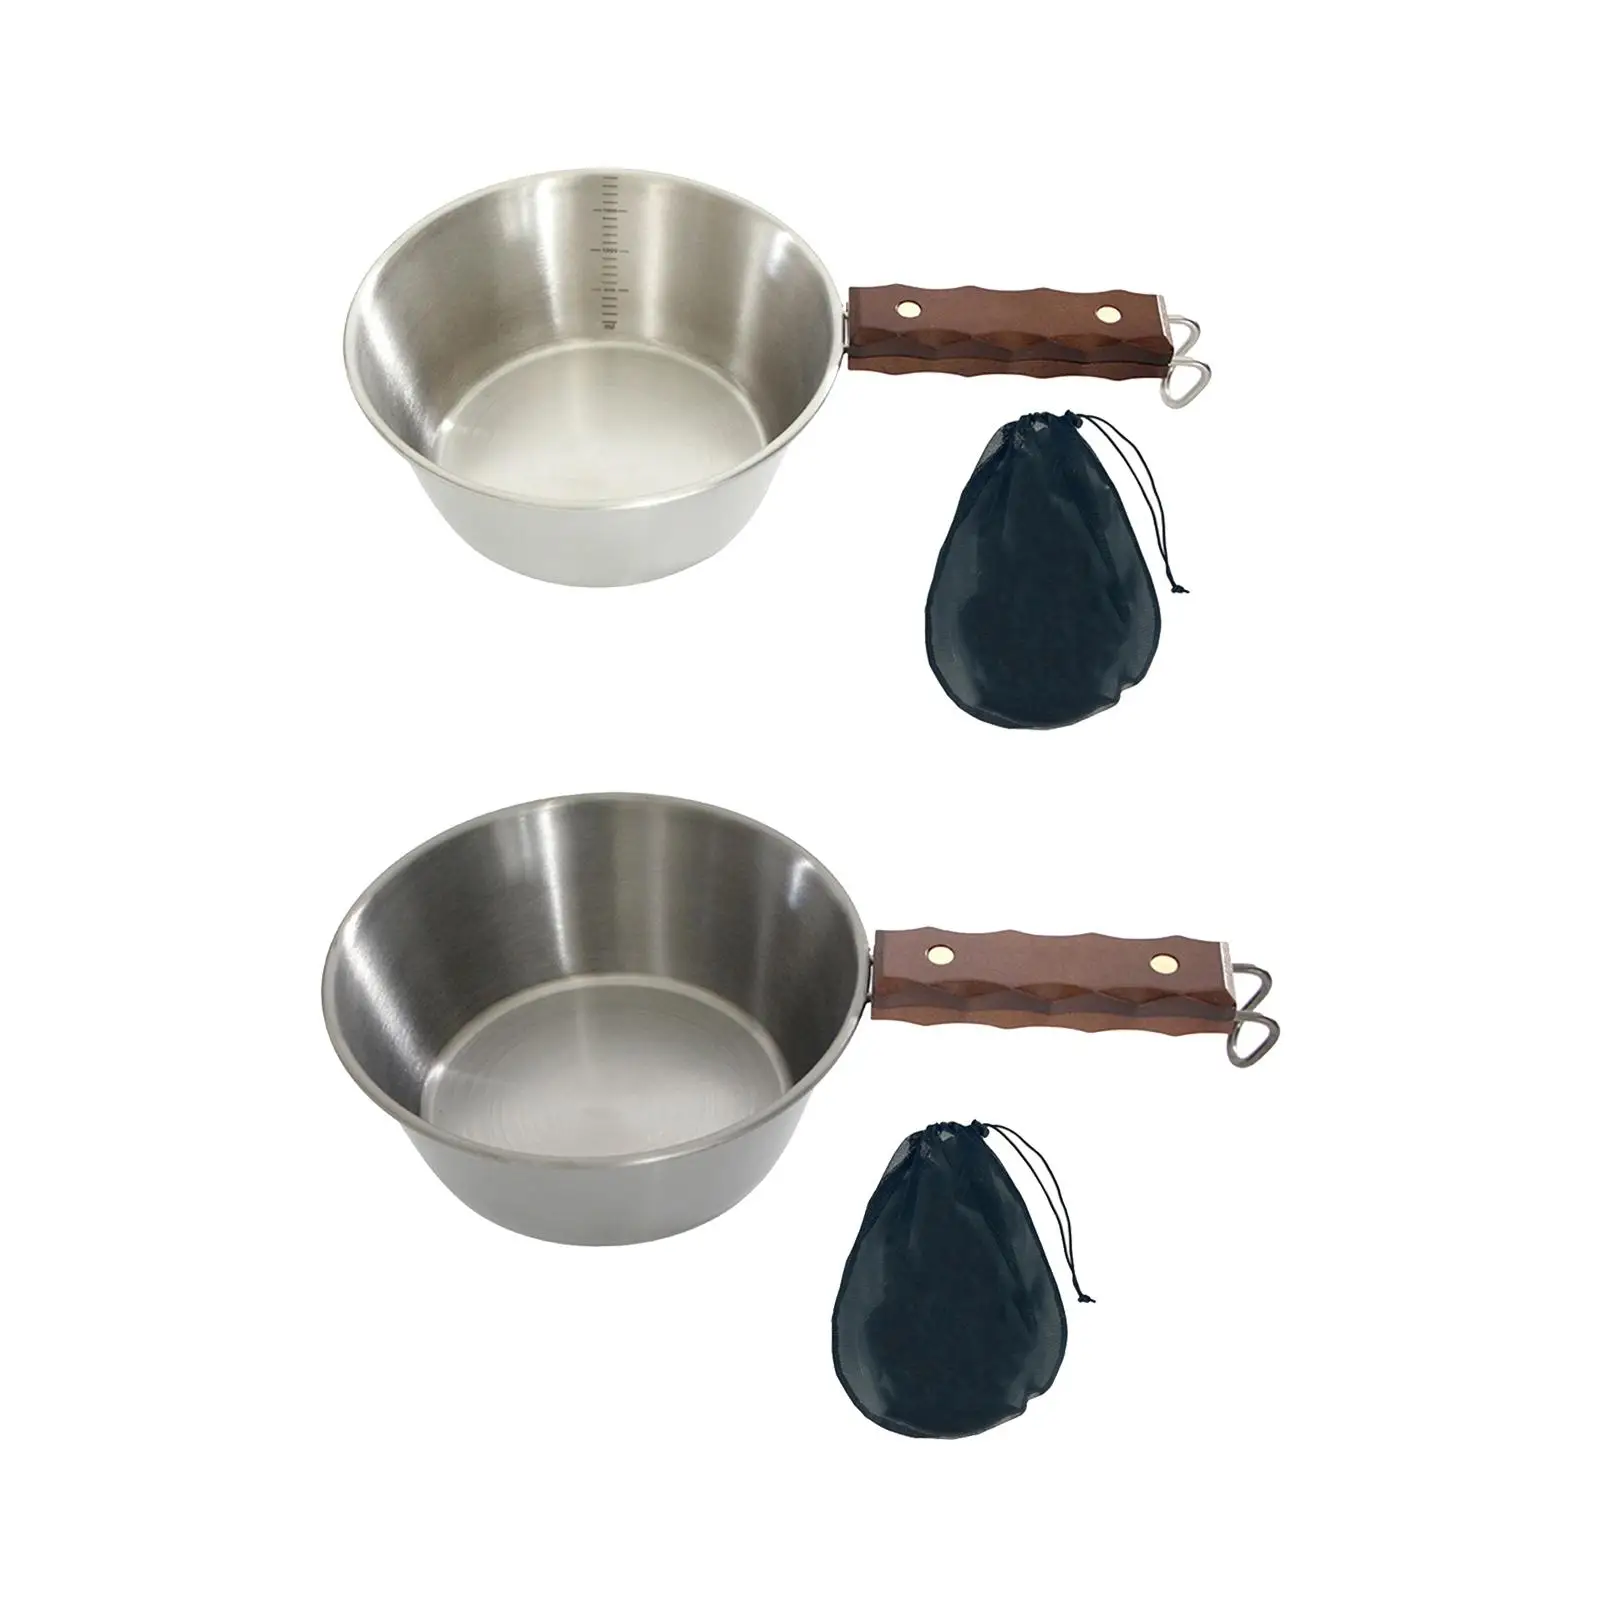 Outdoor Bowl Cup Cookware with Wood Handle with Carry Bag Lightweight Camping Bowl for BBQ Cookout Barbecue Hiking Campfire